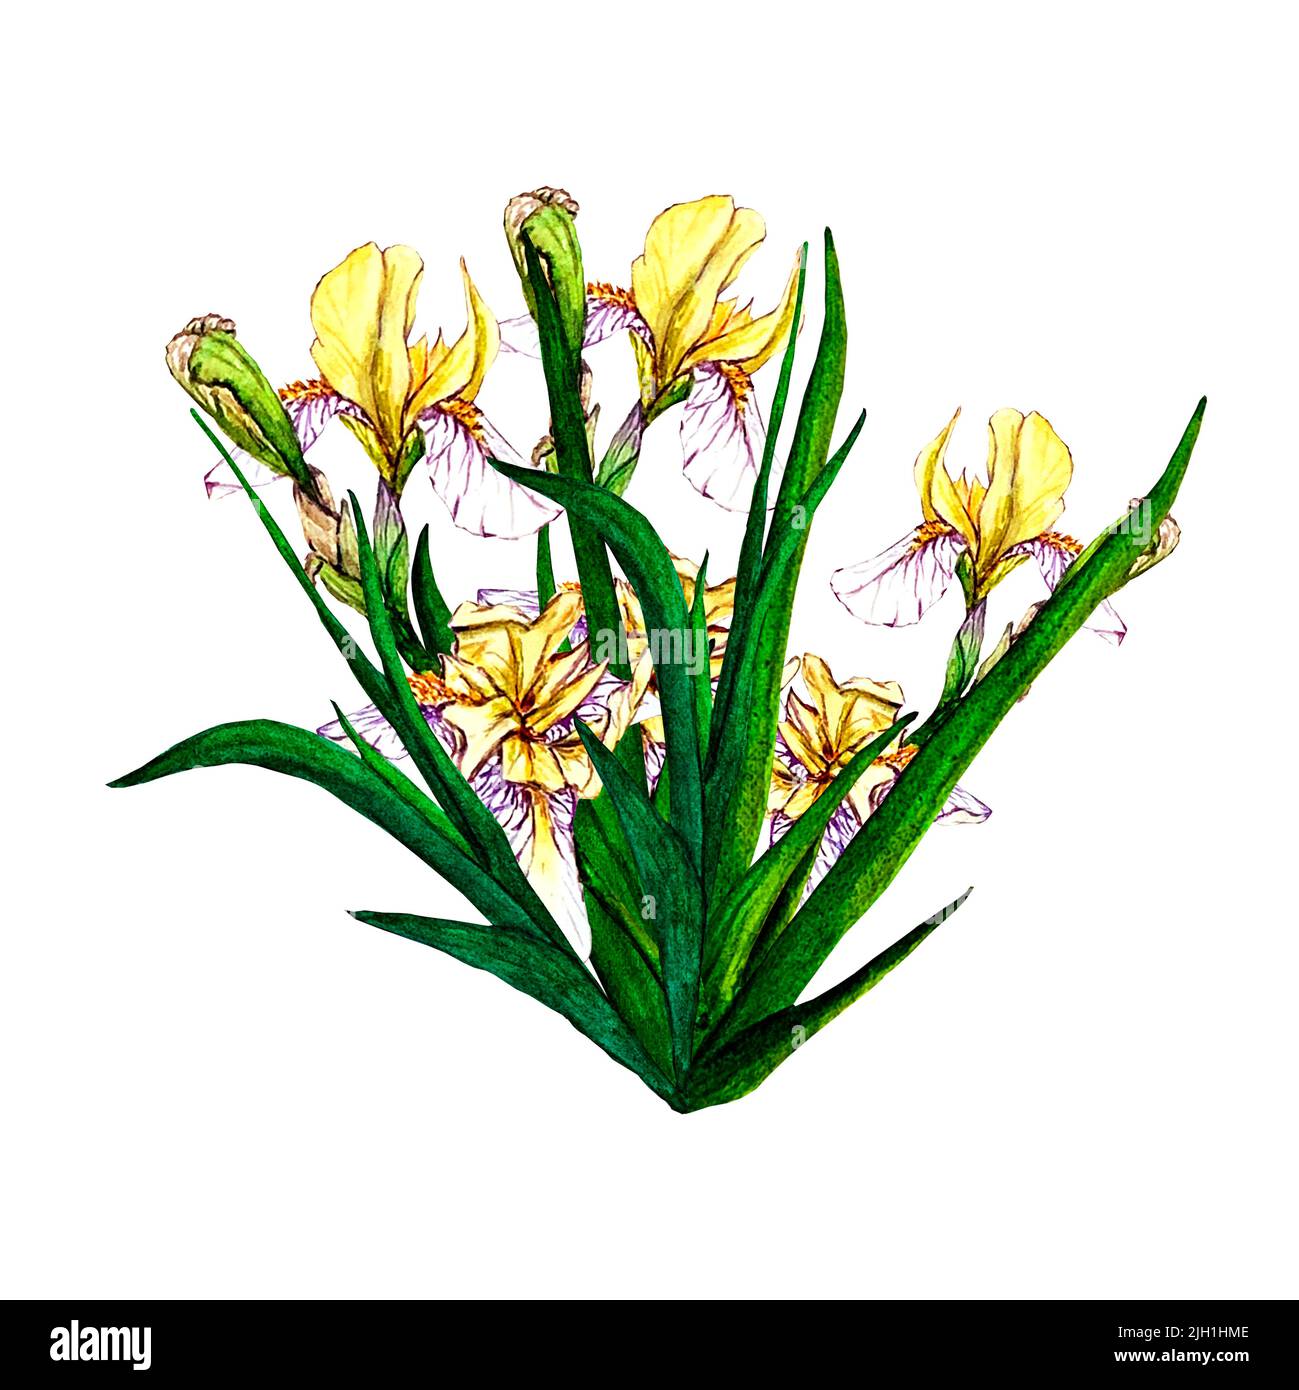 Iris flower drawing Cut Out Stock Images & Pictures - Alamy